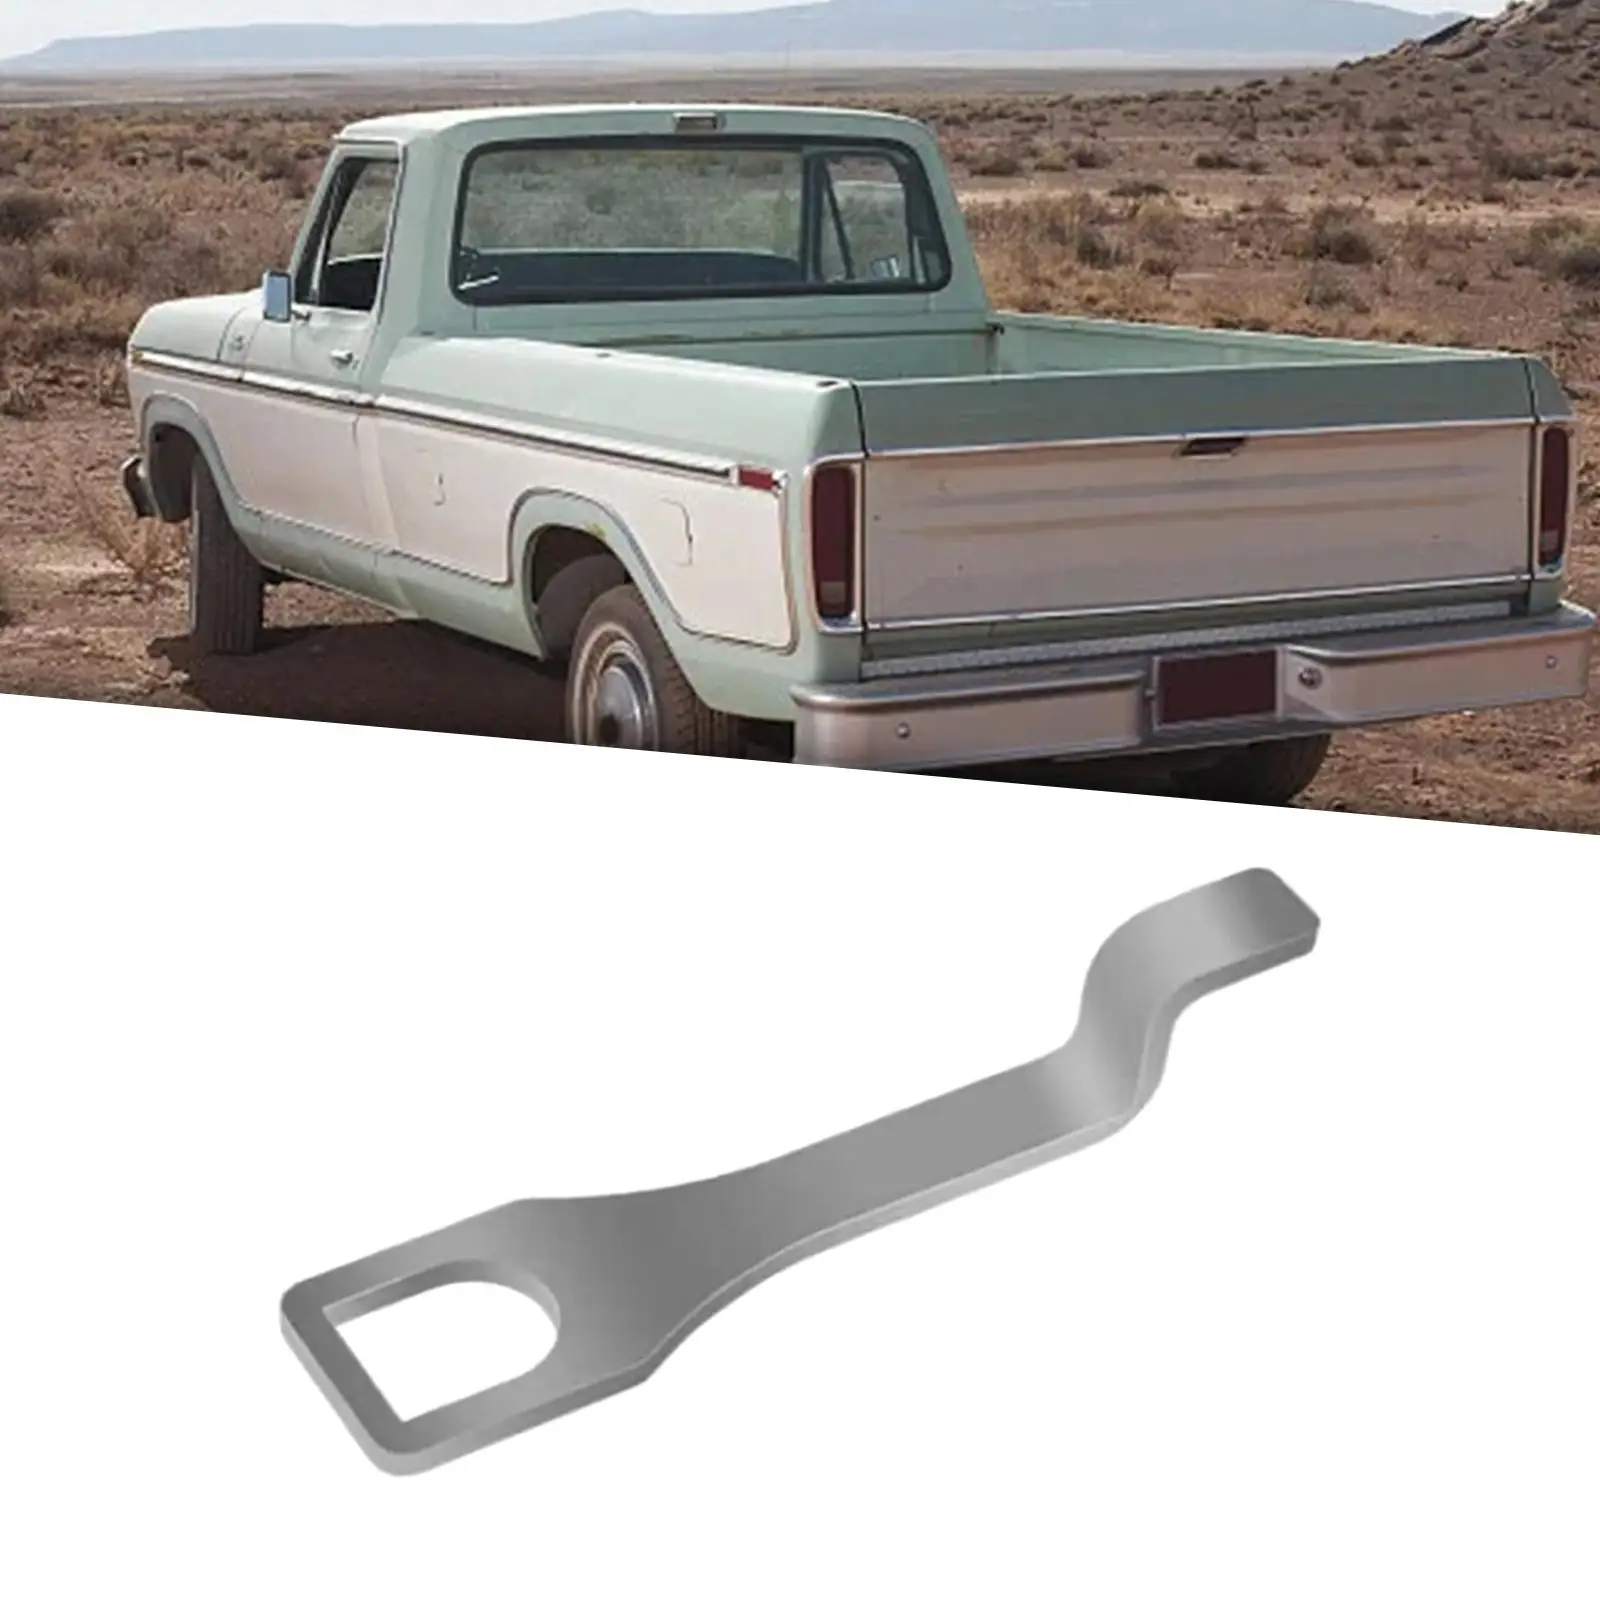 Tailgate Barn Door Standoff Replacement Easy to Install Durable Car Accessories